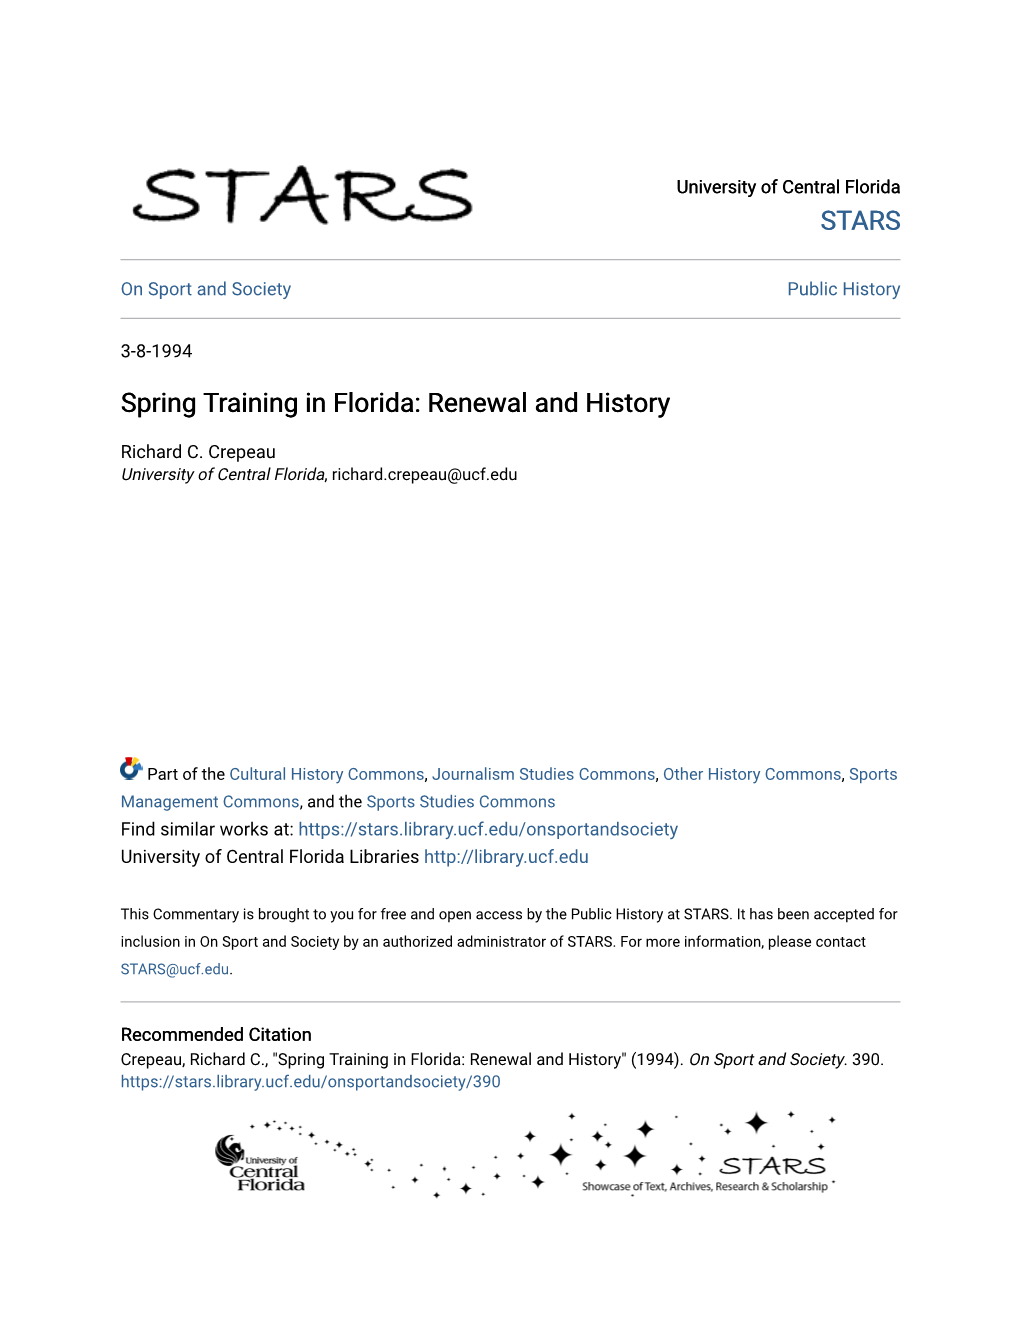 Spring Training in Florida: Renewal and History